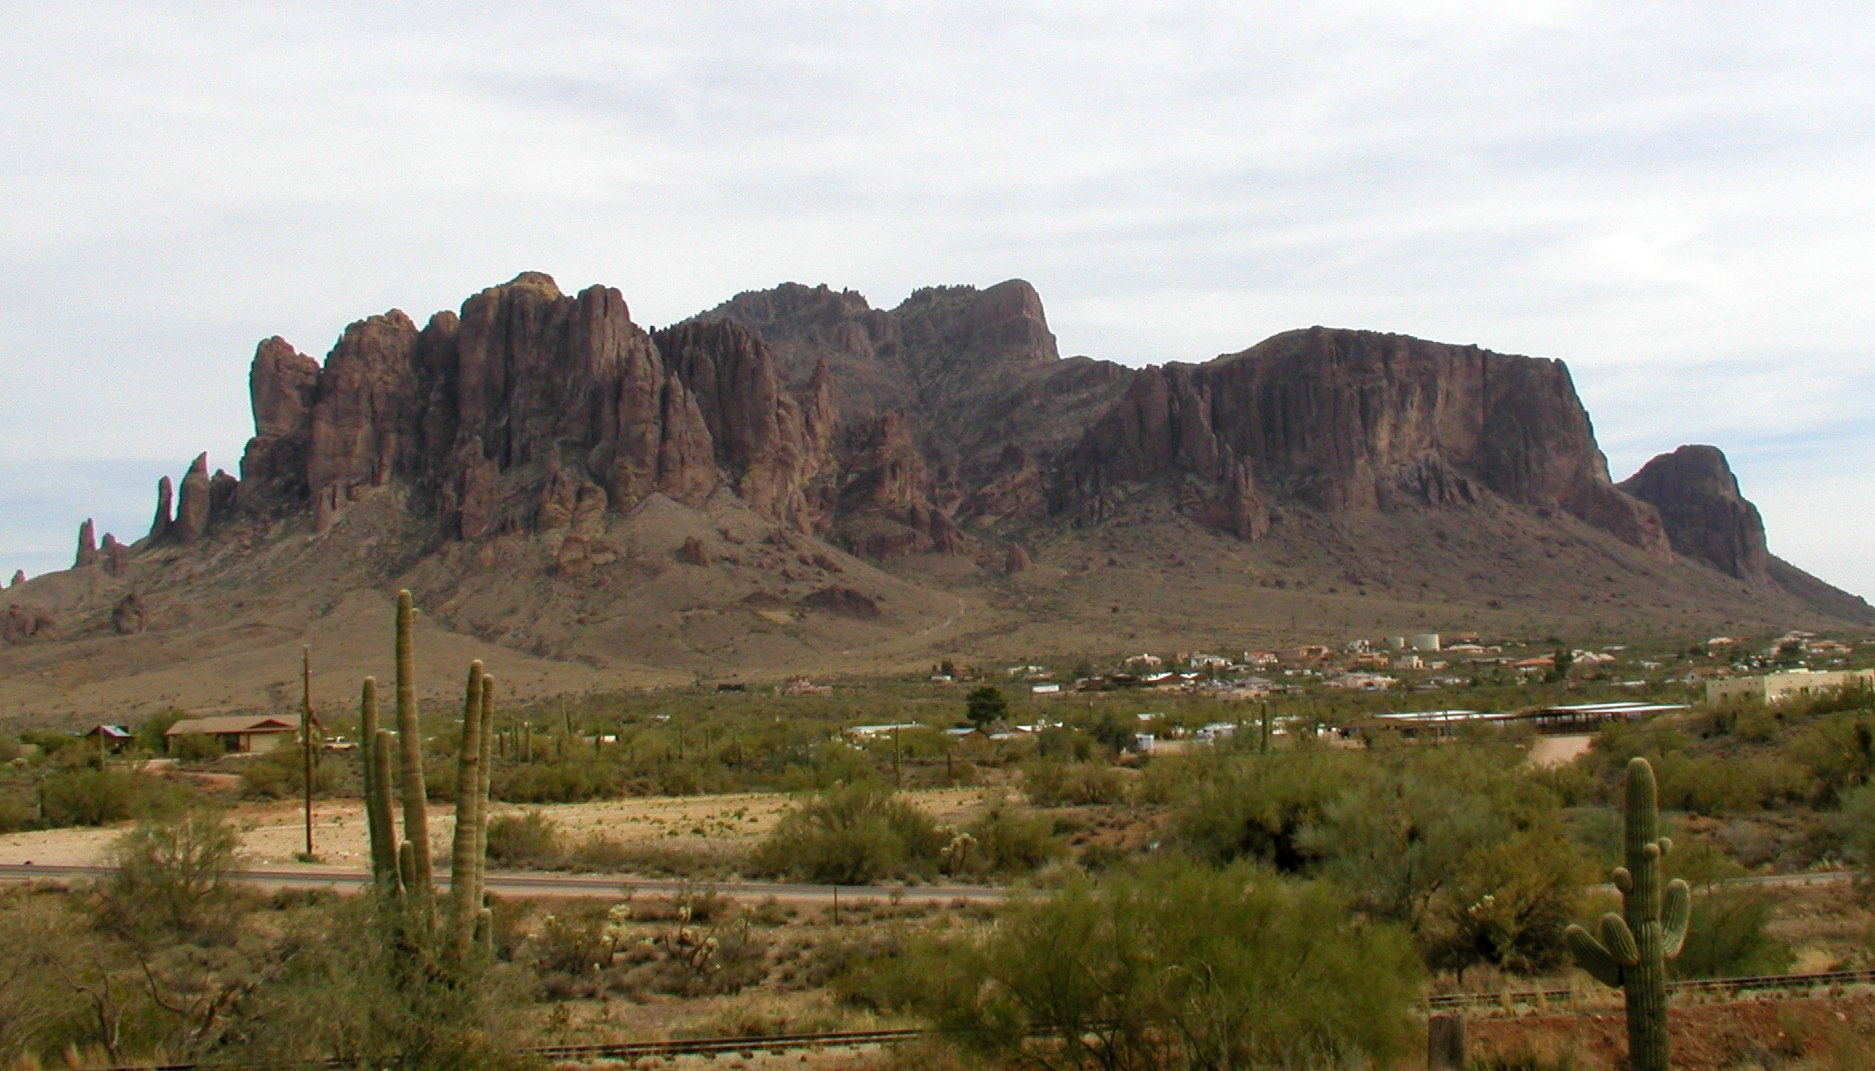 The Lost Dutchman Mine, located in the Superstition Mountains in Apache Jun...